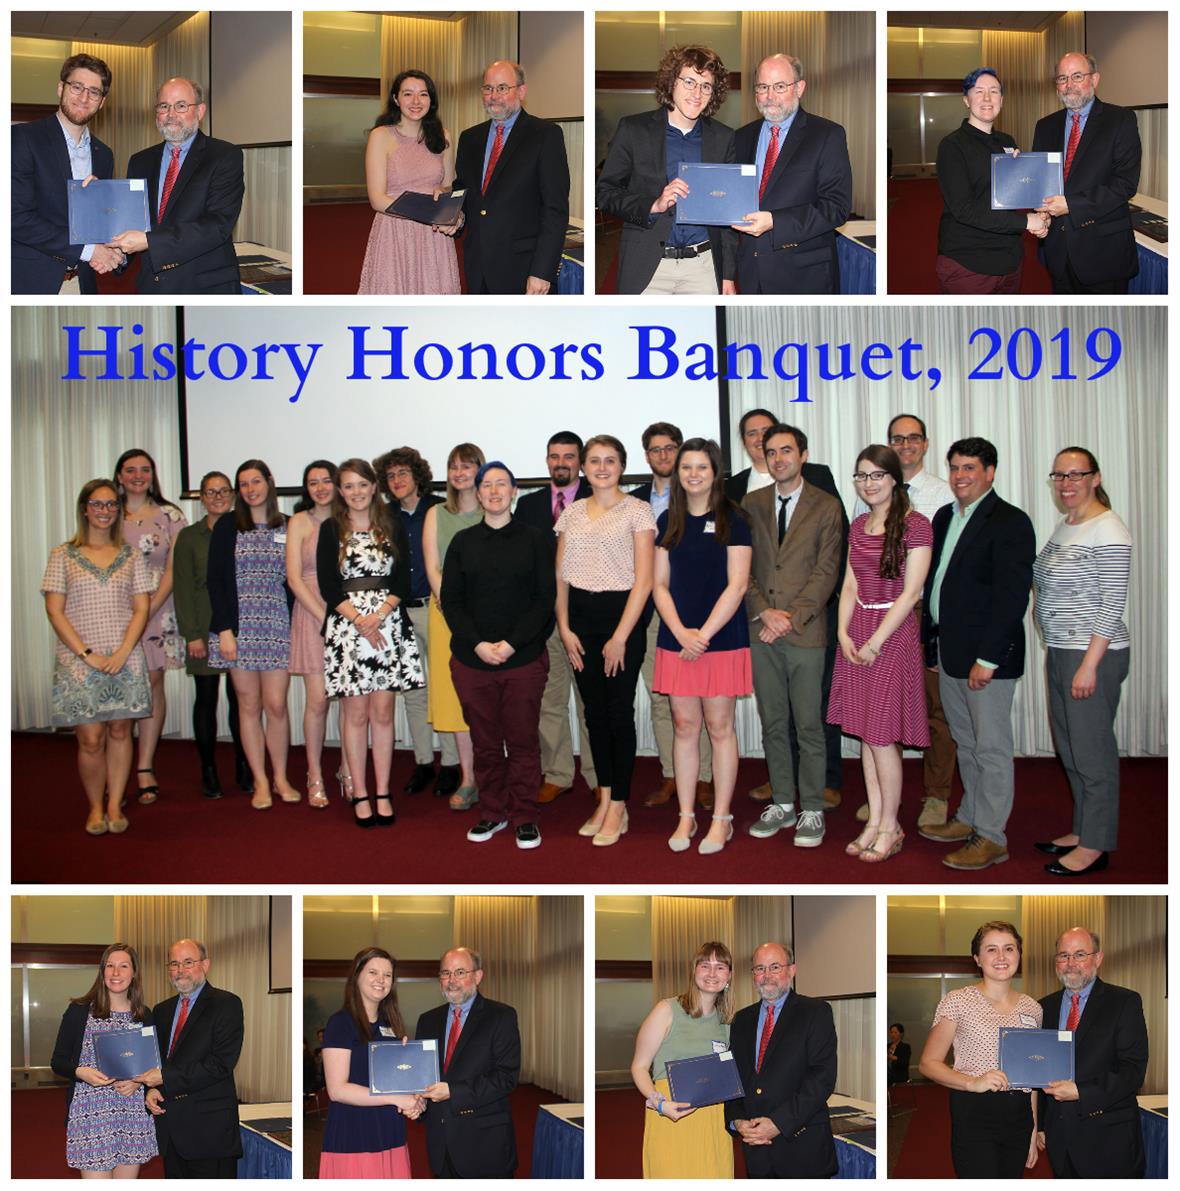 Collage of images taken at the History Honors Banquet, 2019